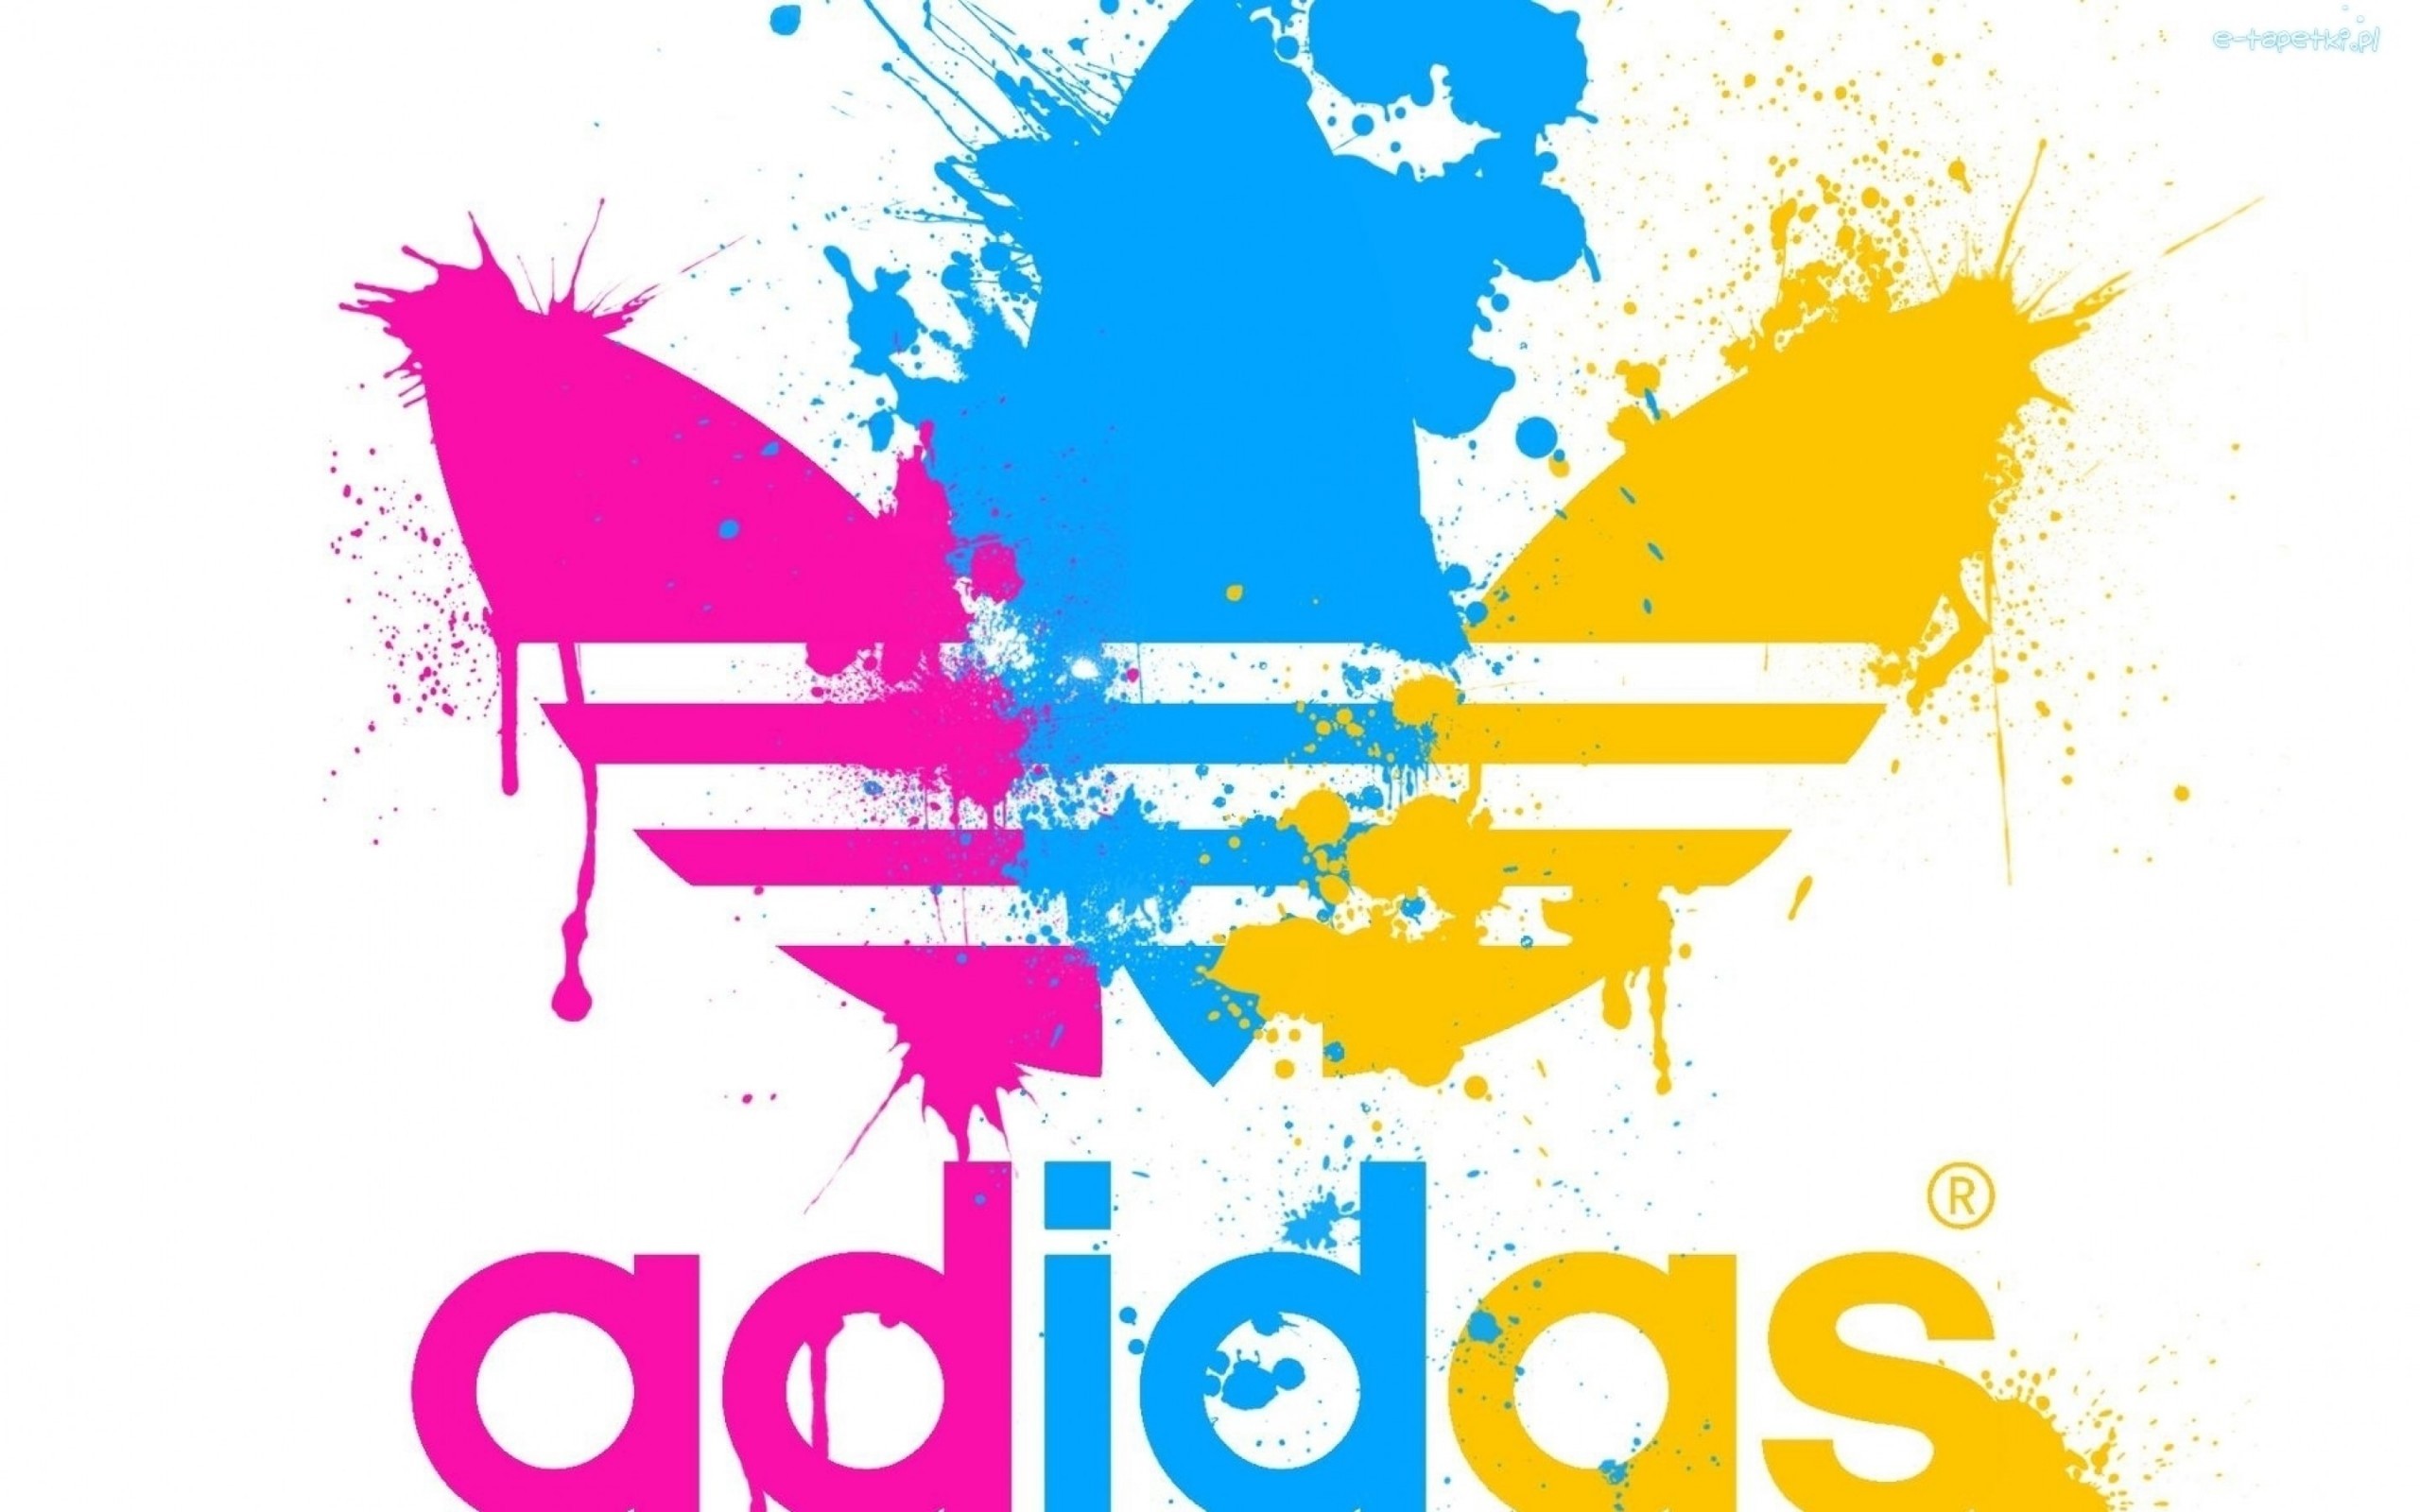 2560x1600 hd adidas logo wallpapers neon wallpapers photo hd desktop wallpapers  amazing images cool smart phone background photos download artworks ultra  hd 4k ...